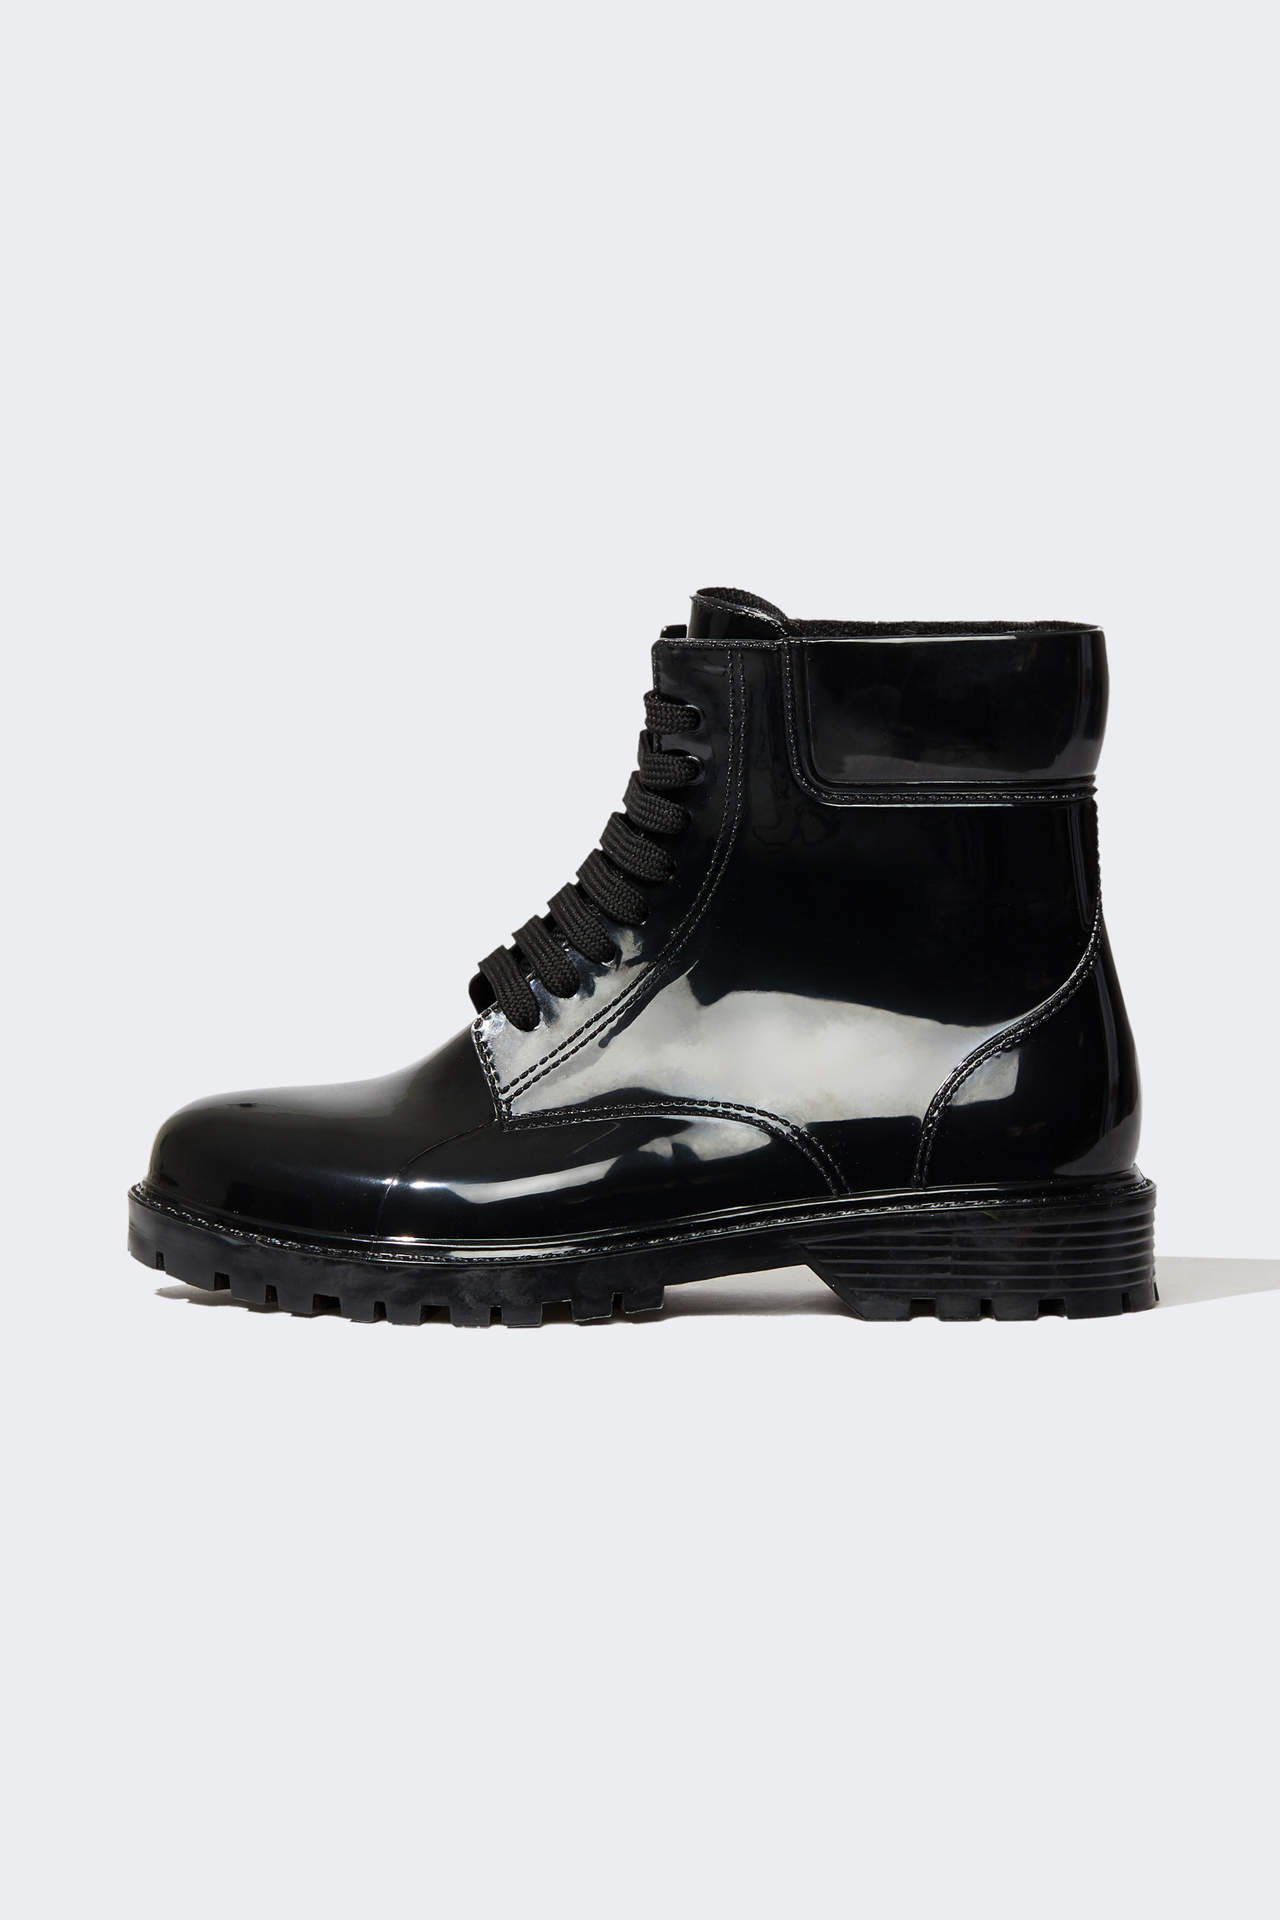 DEFACTO Thick Sole Boots